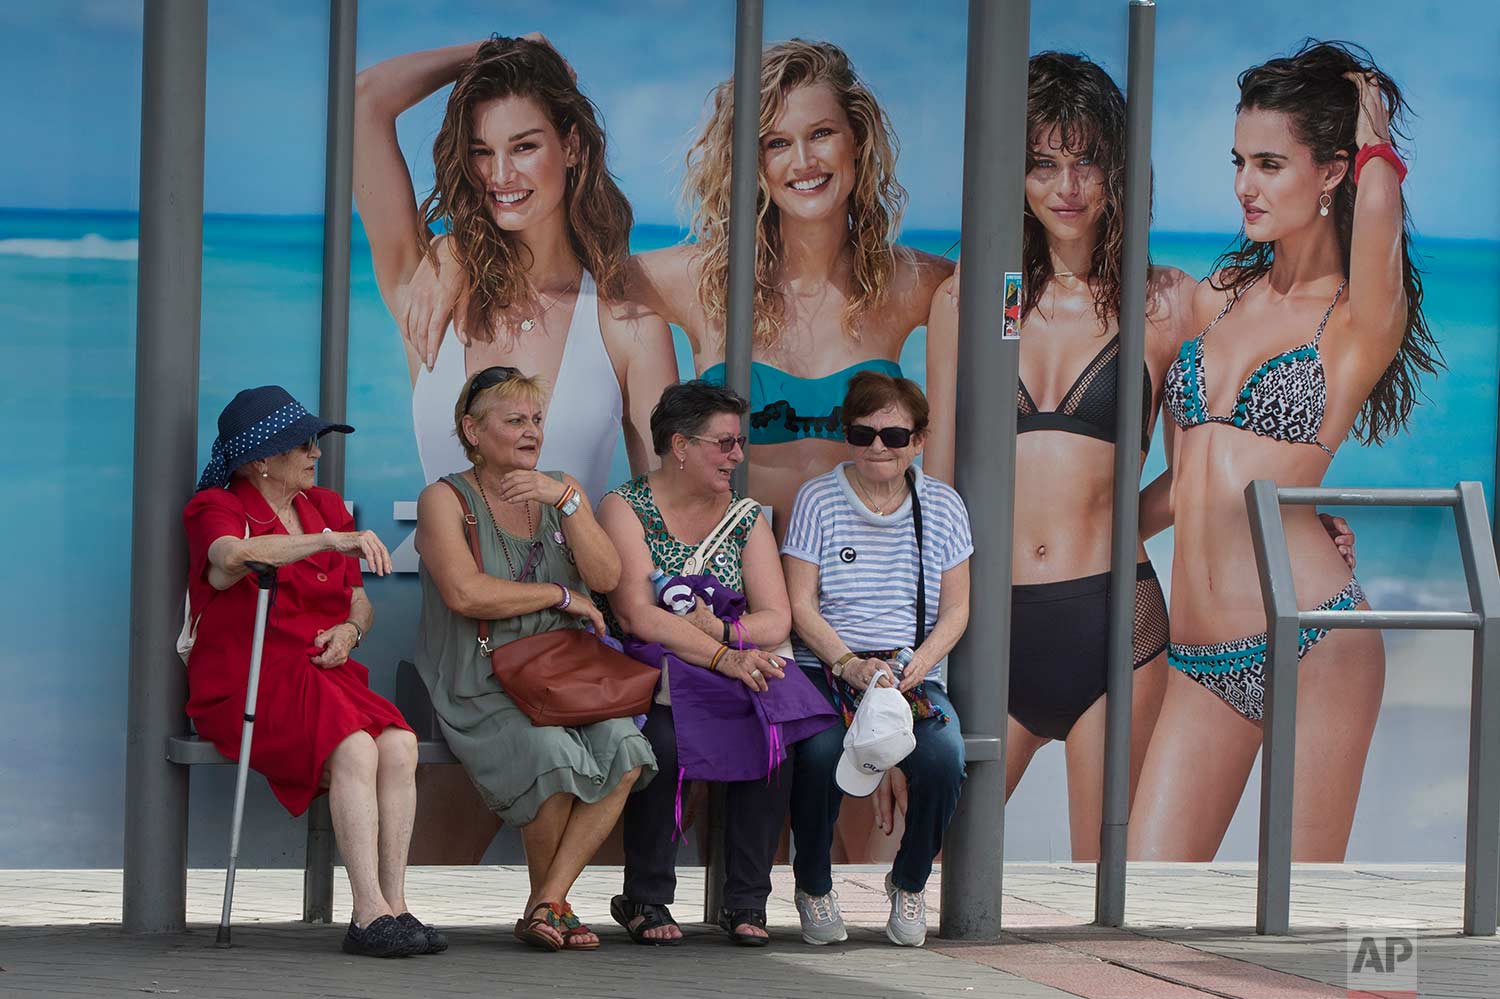  In this Saturday, May 27, 2017 photo, four women wait at a bus stop in front of an advertising poster for swimwear and beach wear in Madrid, Spain. (AP Photo/Paul White) 